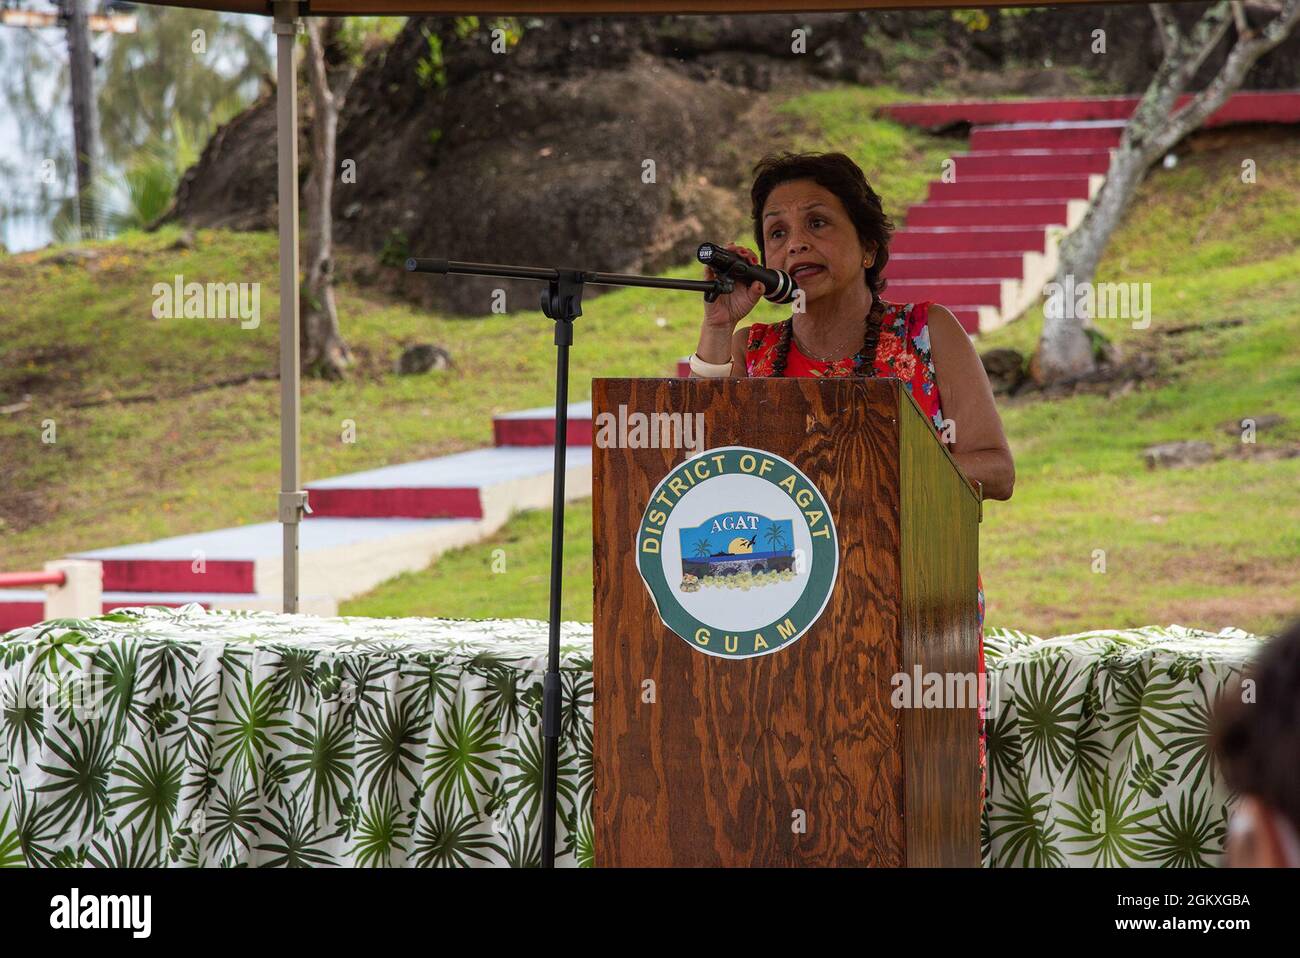 AGAT, Guam (July 19, 2021) - Governor of Guam Lourdes Leon Guerrero offers remarks during the Hågat Memorial Ceremony in Agat July 19. The ceremony honored the men and women of Agat who suffered and died during World War II, and the military service members who liberated the island. Stock Photo